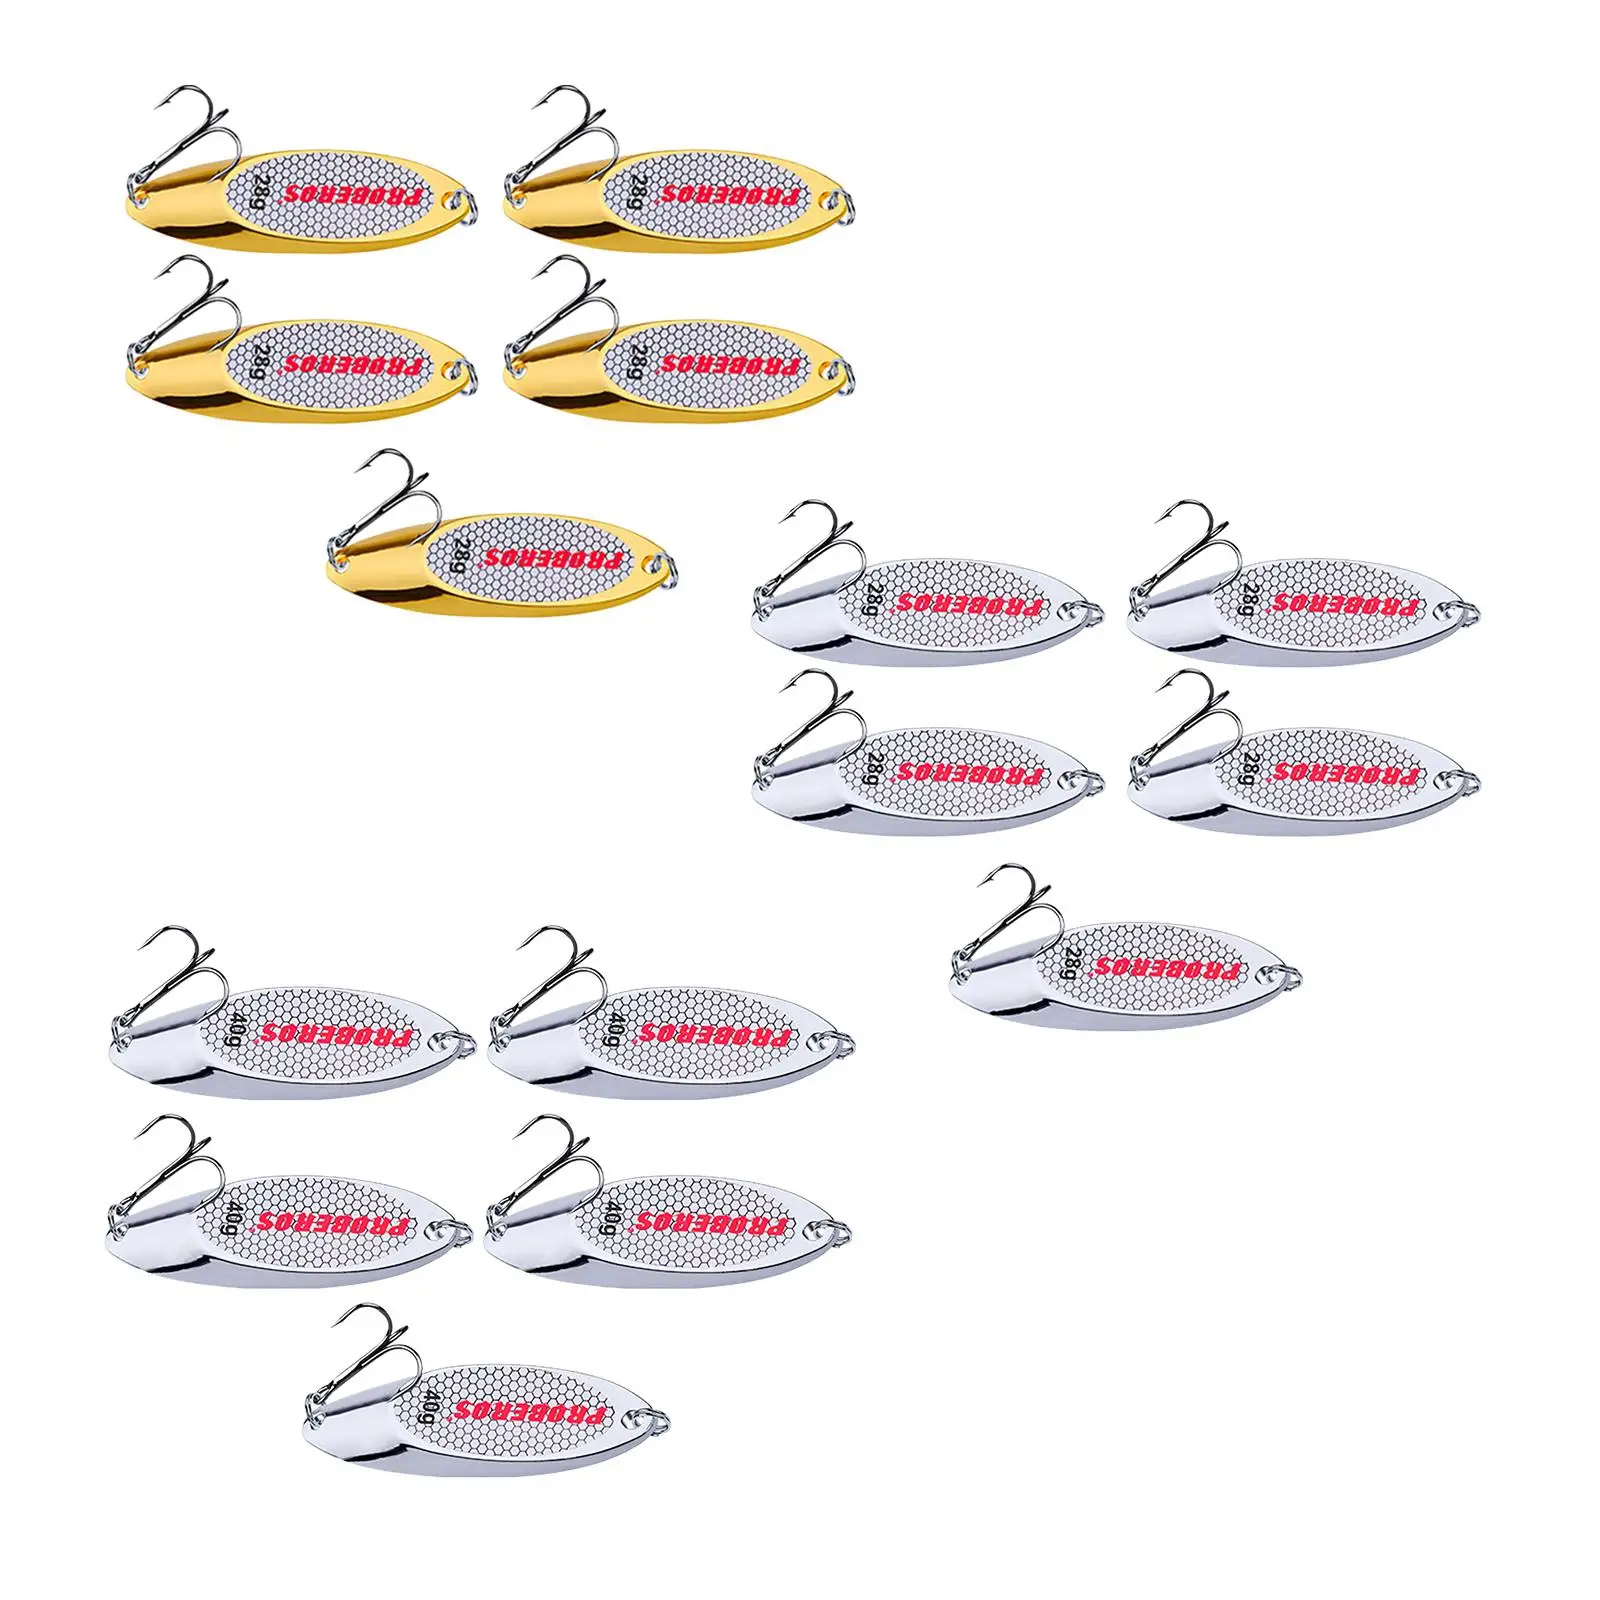 5x Fishing Spoons Hard Metal Fishing Baits for Huge Distance Cast Saltwater